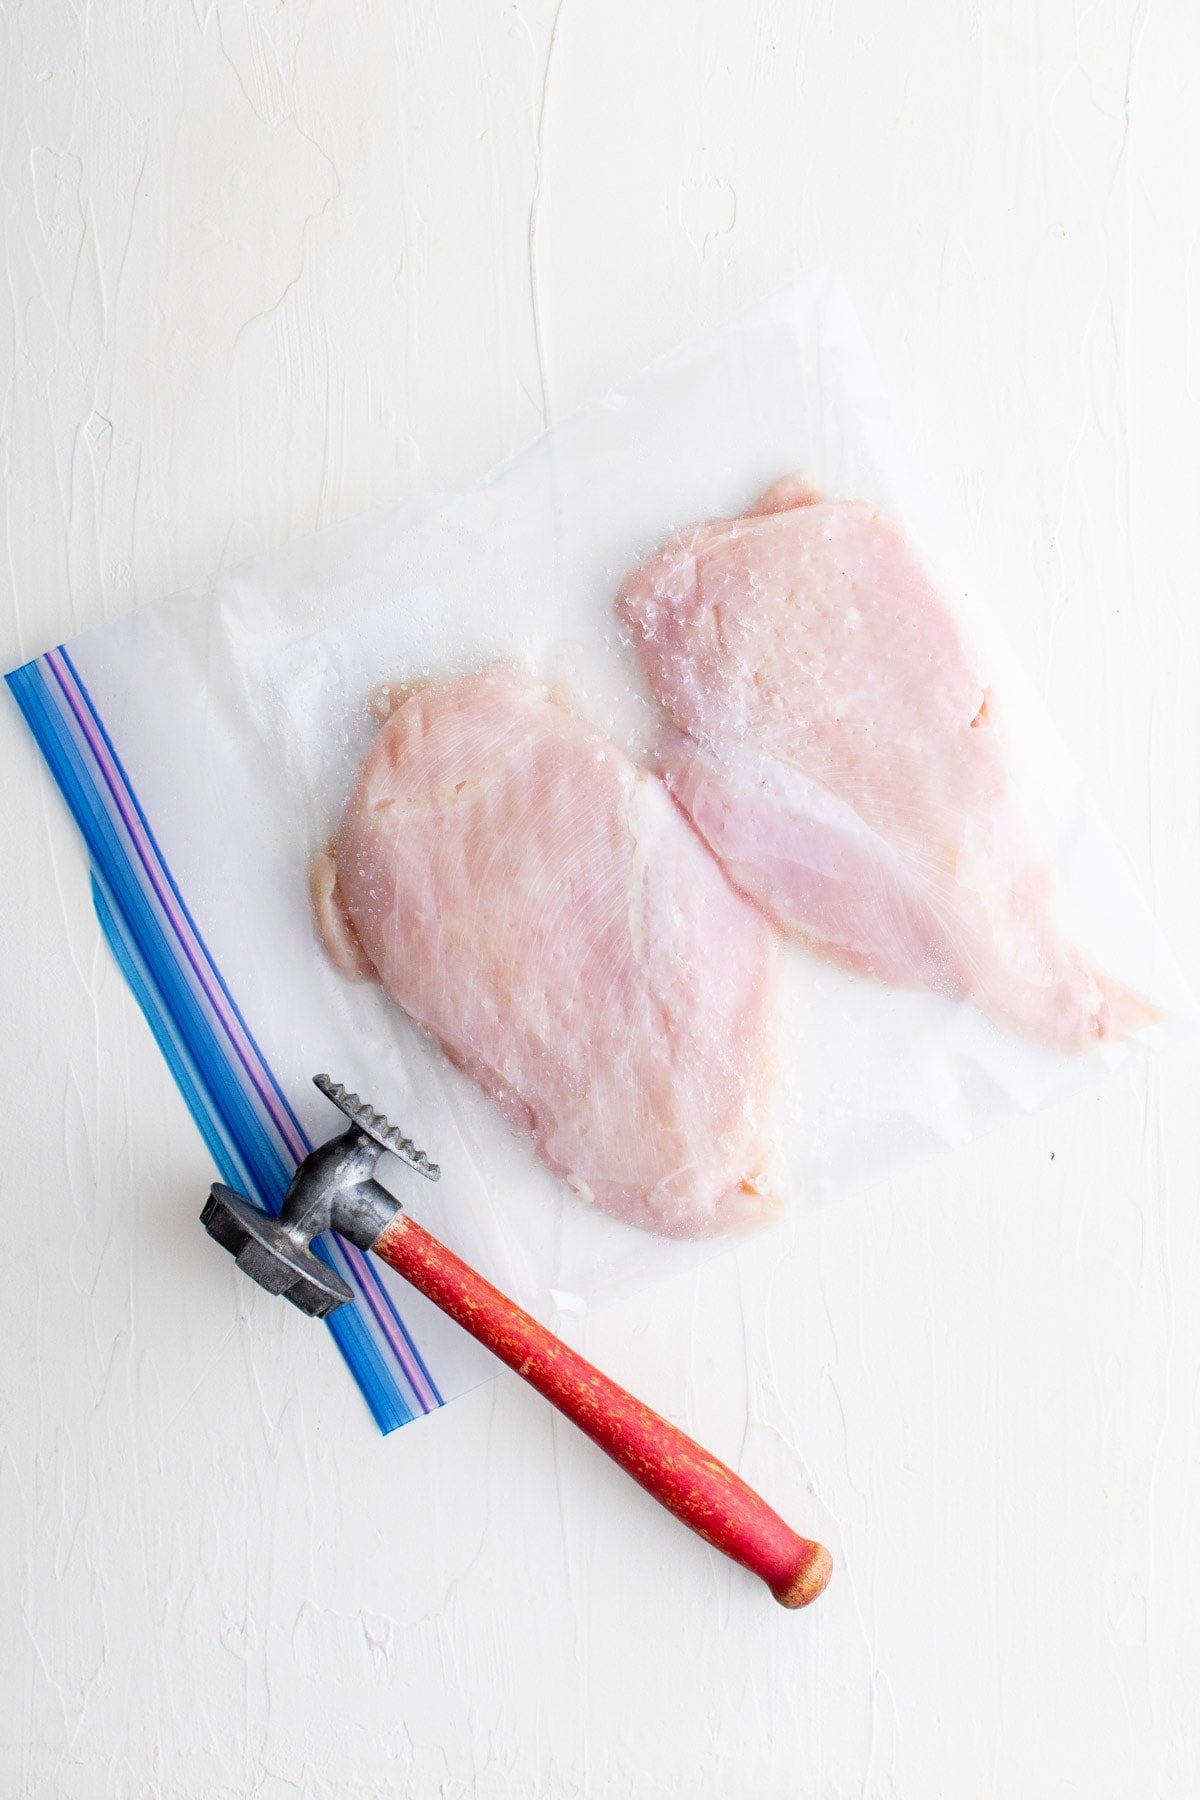 chicken breasts wrapped in plastic and a meat mallet